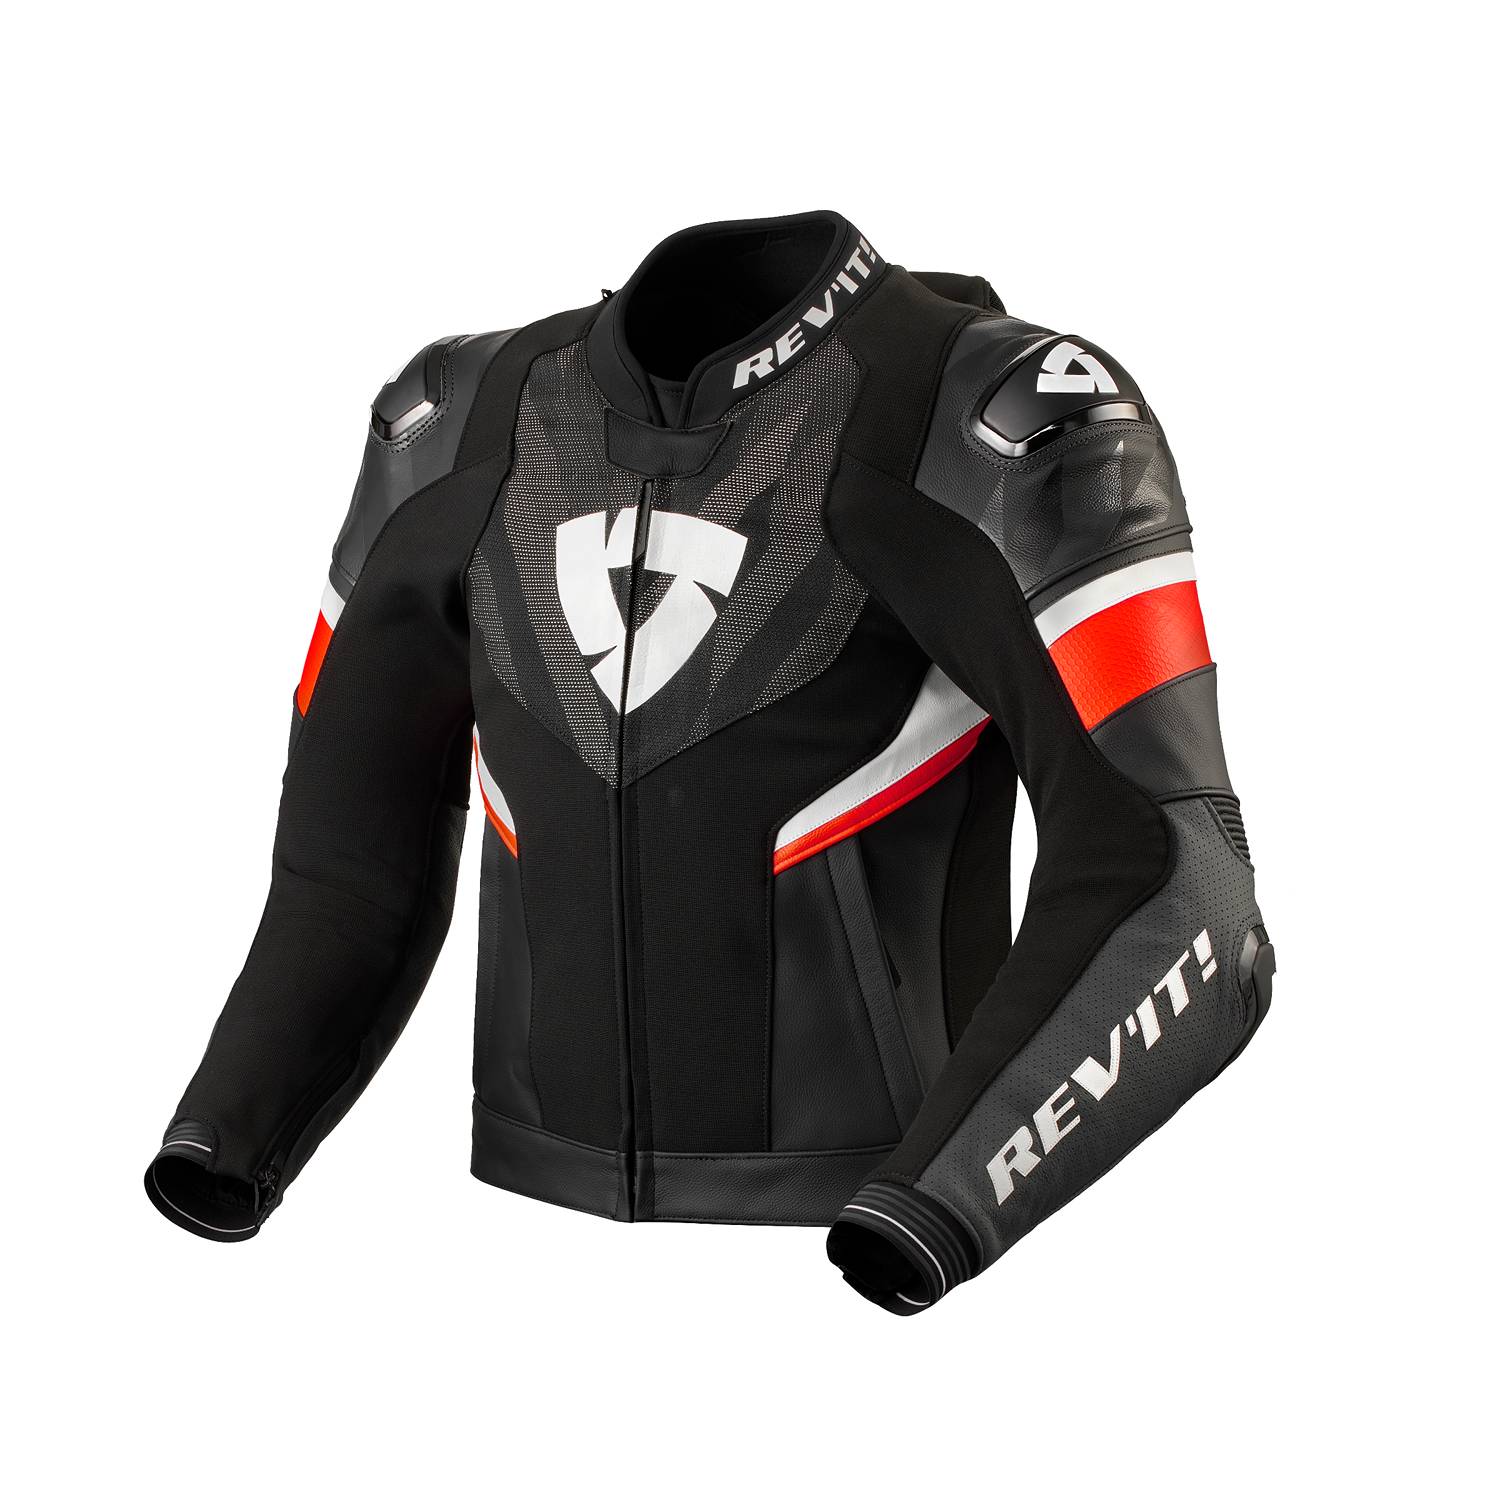 Image of REV'IT! Hyperspeed 2 Pro Jacket Black Neon Red Size 54 ID 8700001358743